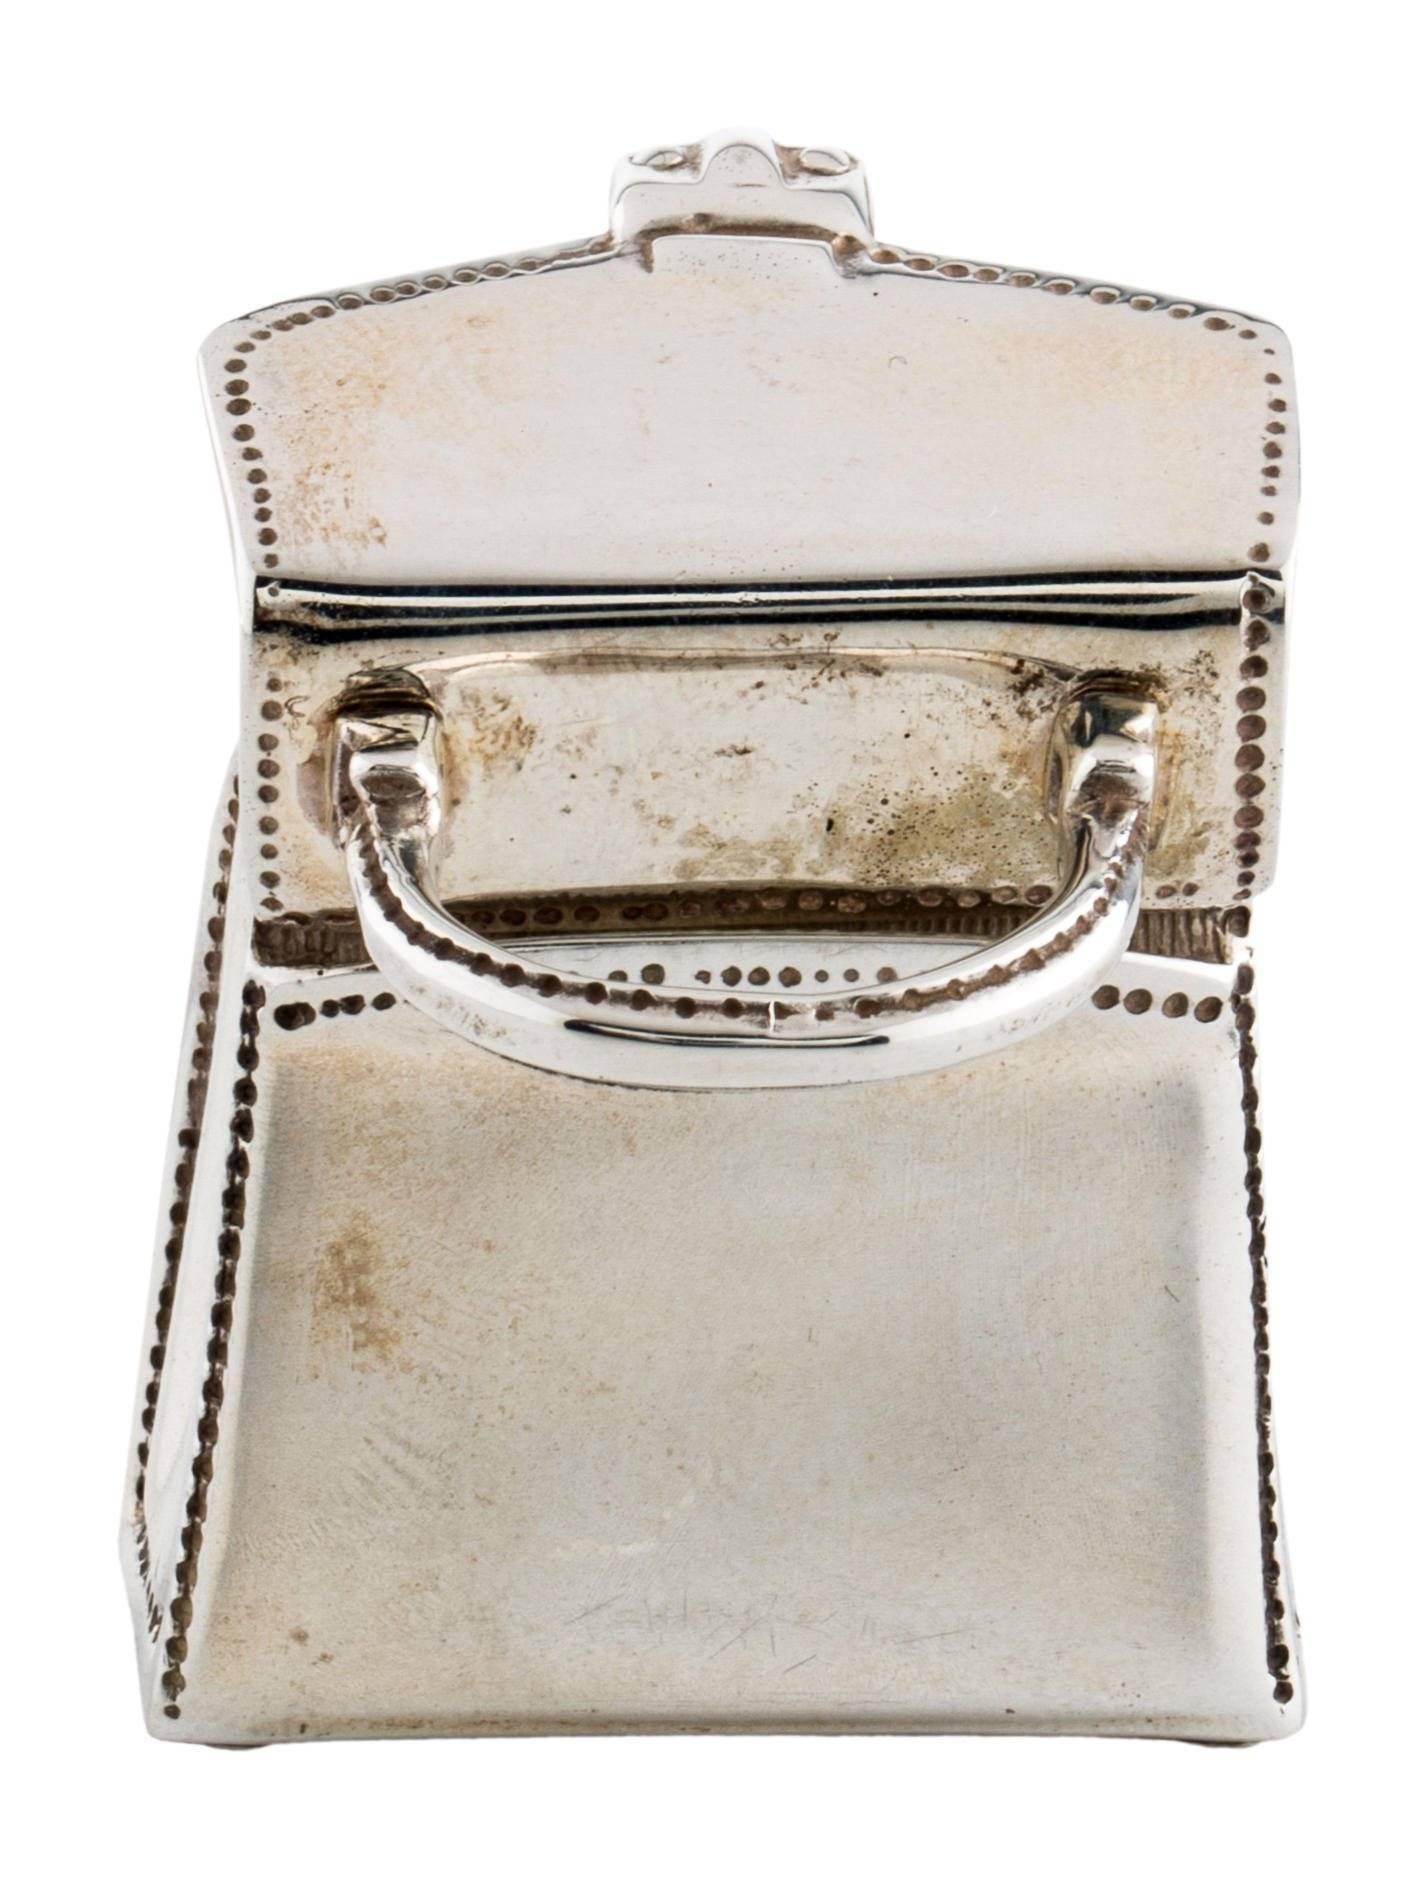 CURATOR'S NOTES

Tiffany & Co Genuine Sterling Silver Hand Bag Pendant Pill Trinket Box Accessory

Sterling silver - 925
Hinge closure
Signed
Measures 1.25" W x 1.75" H x 0.50" D 
Includes original Tiffany & Co dust bag